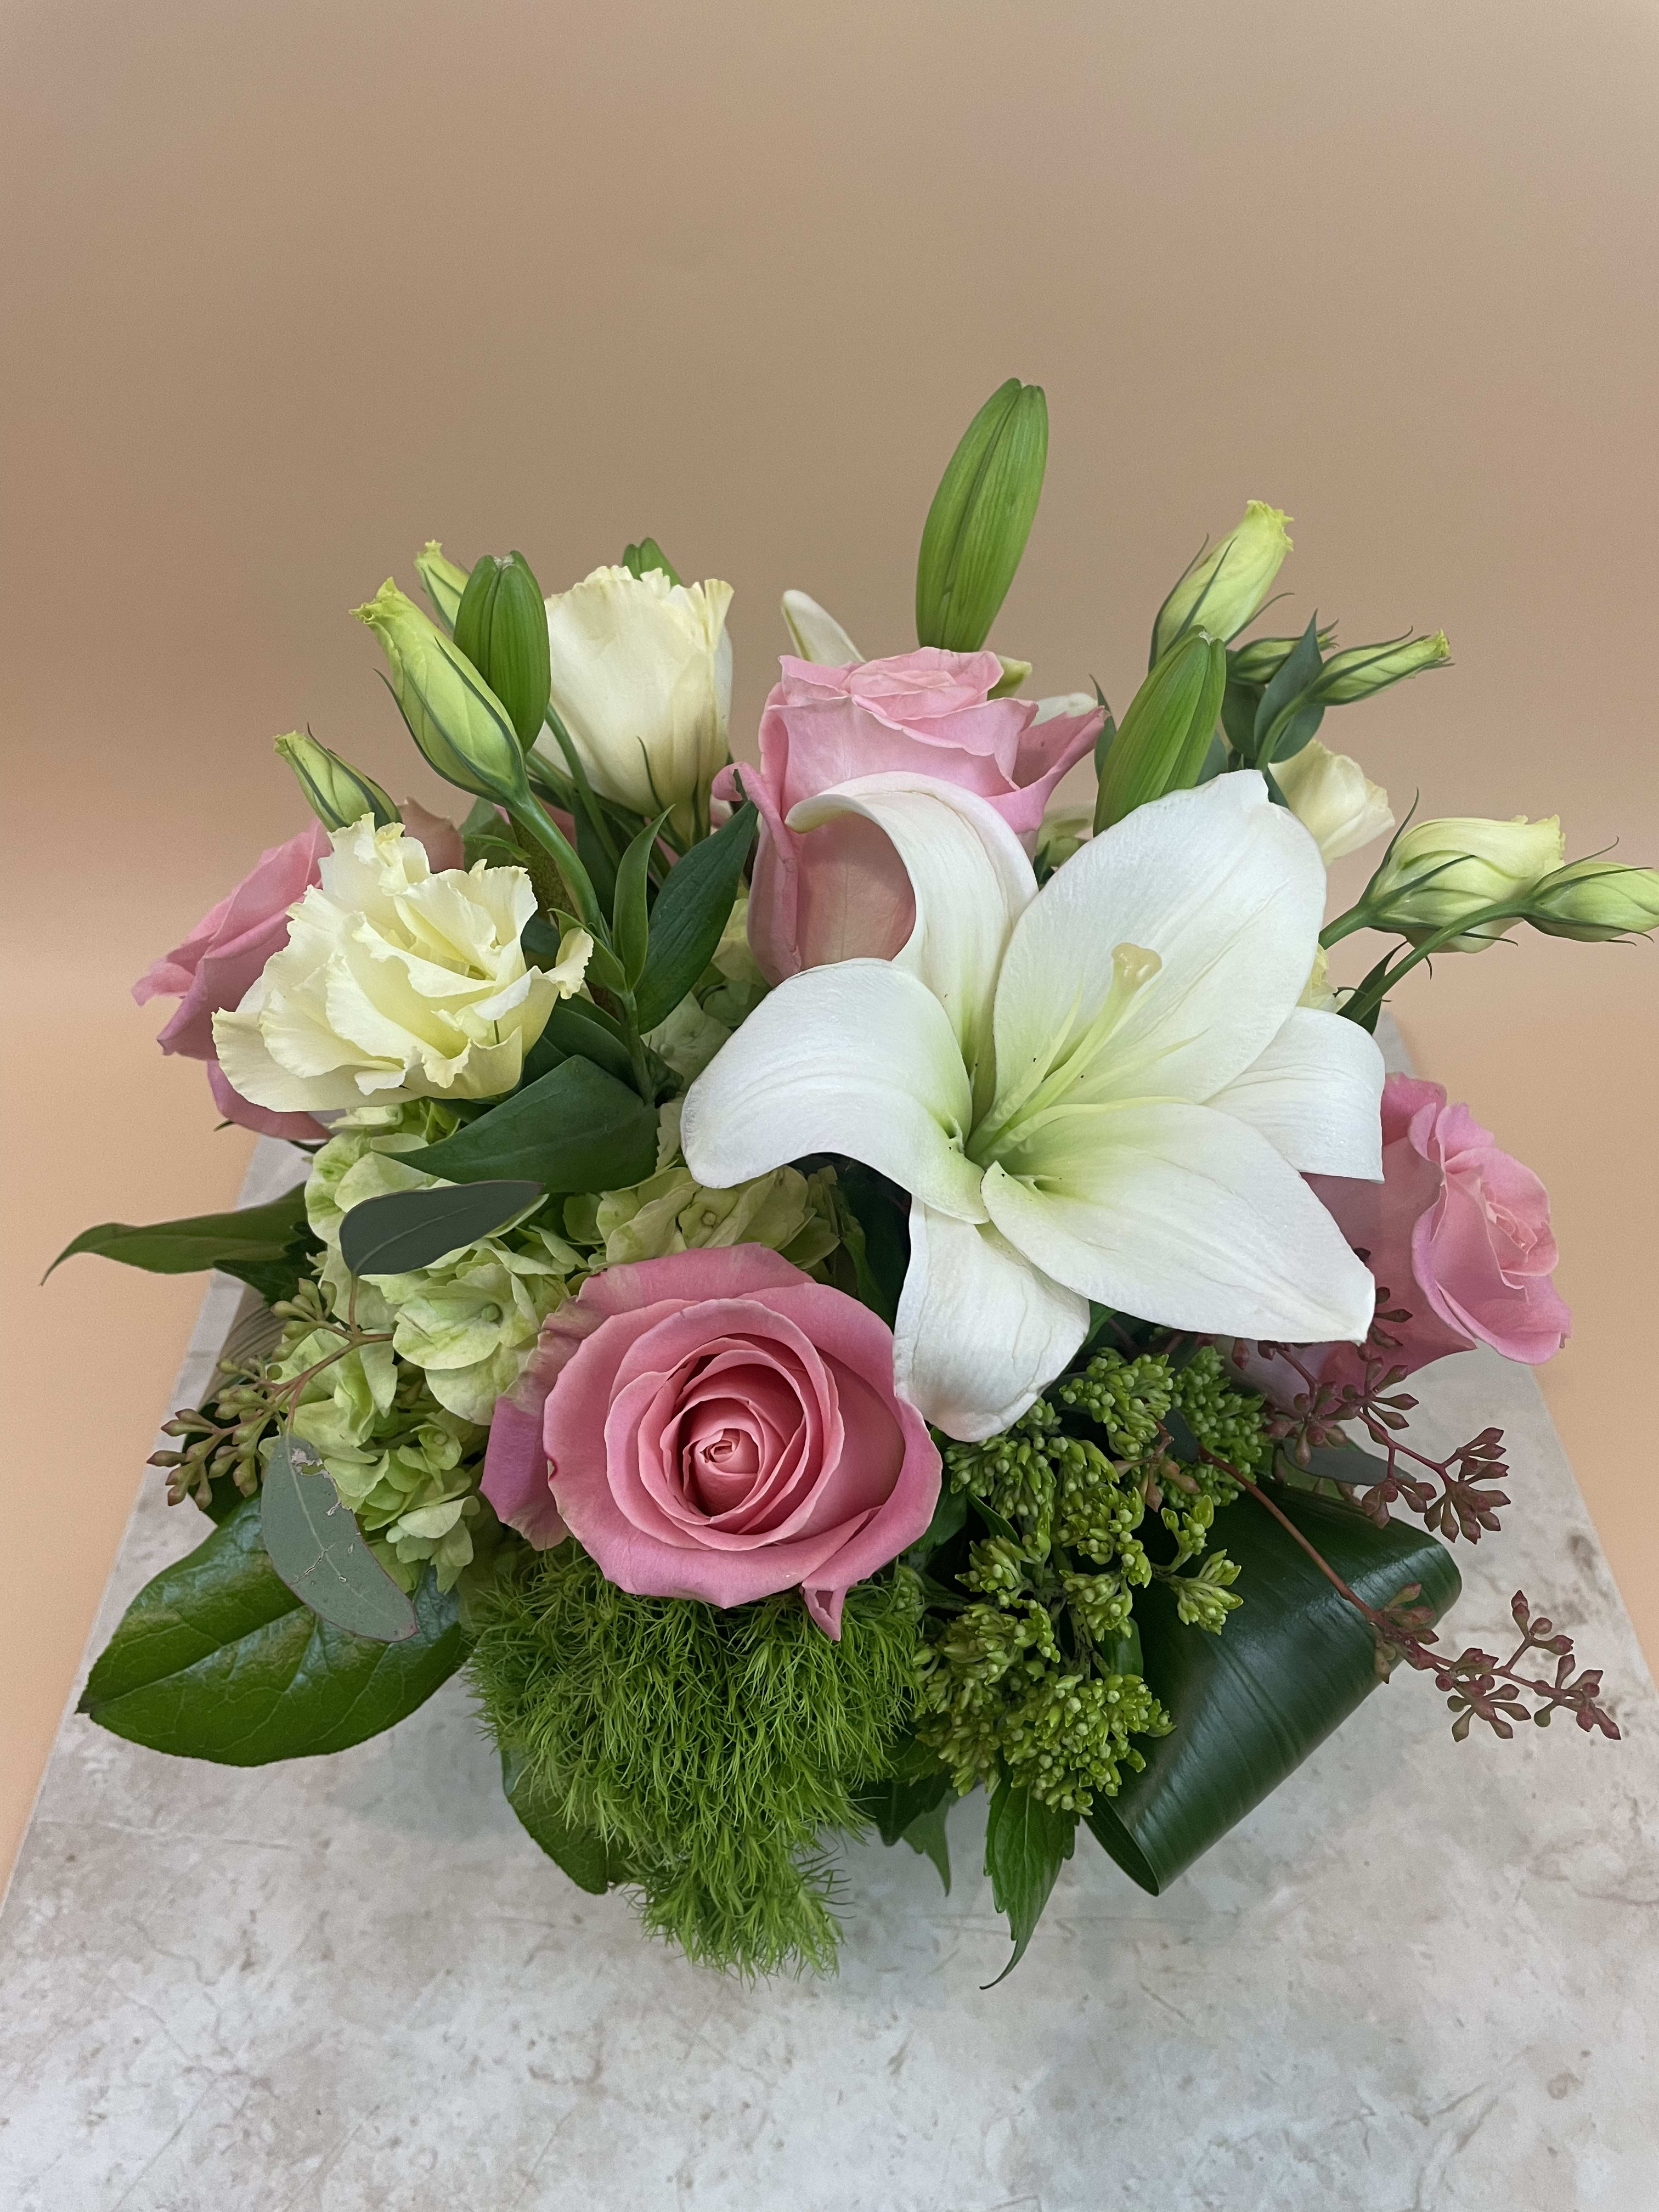 Sweet Success - A coveted collection of lush pink and white blossoms.